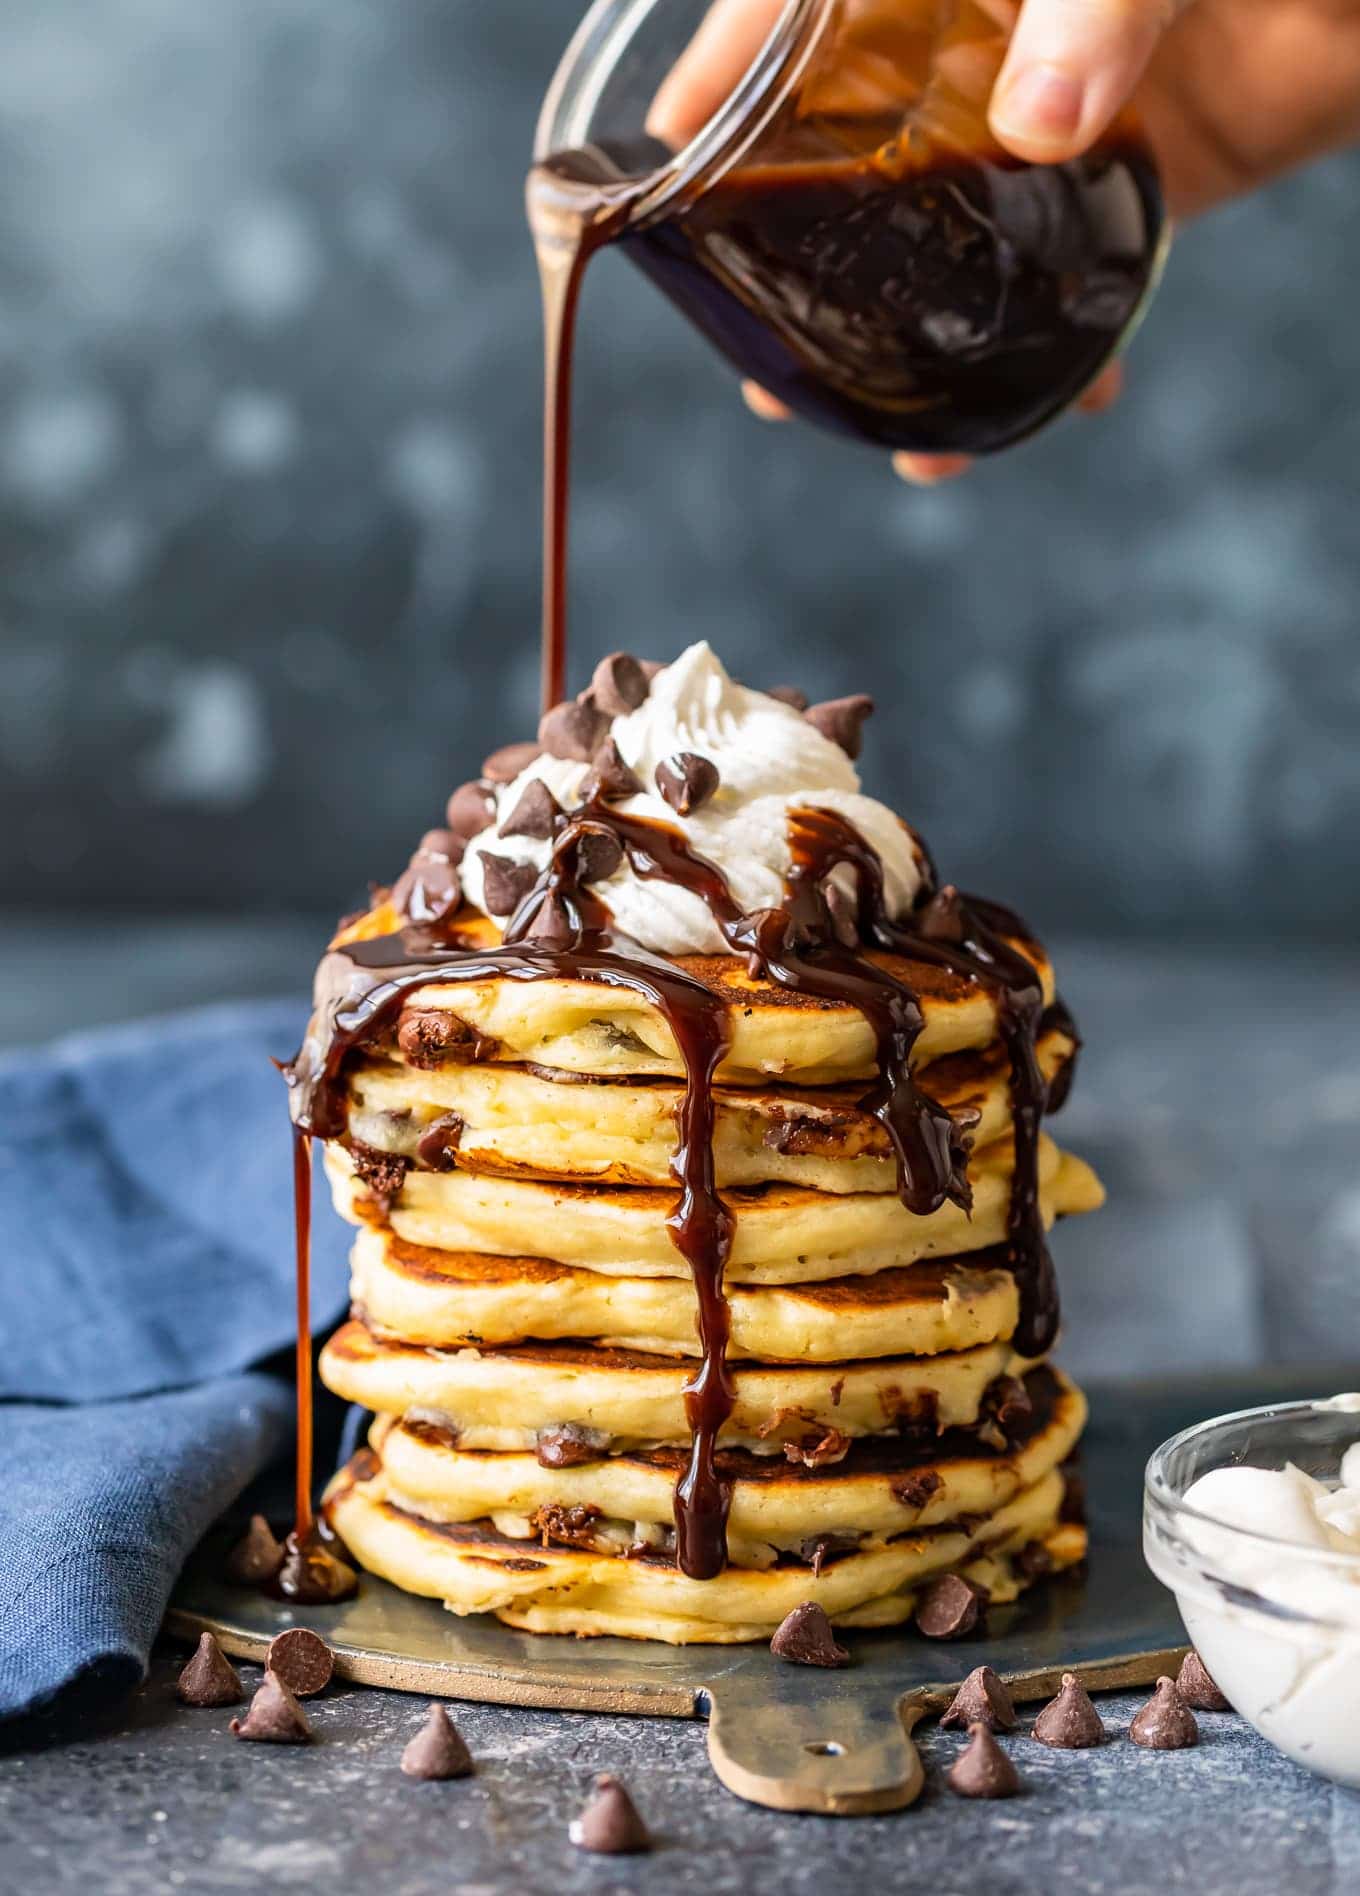 Chocolate syrup running down pancakes